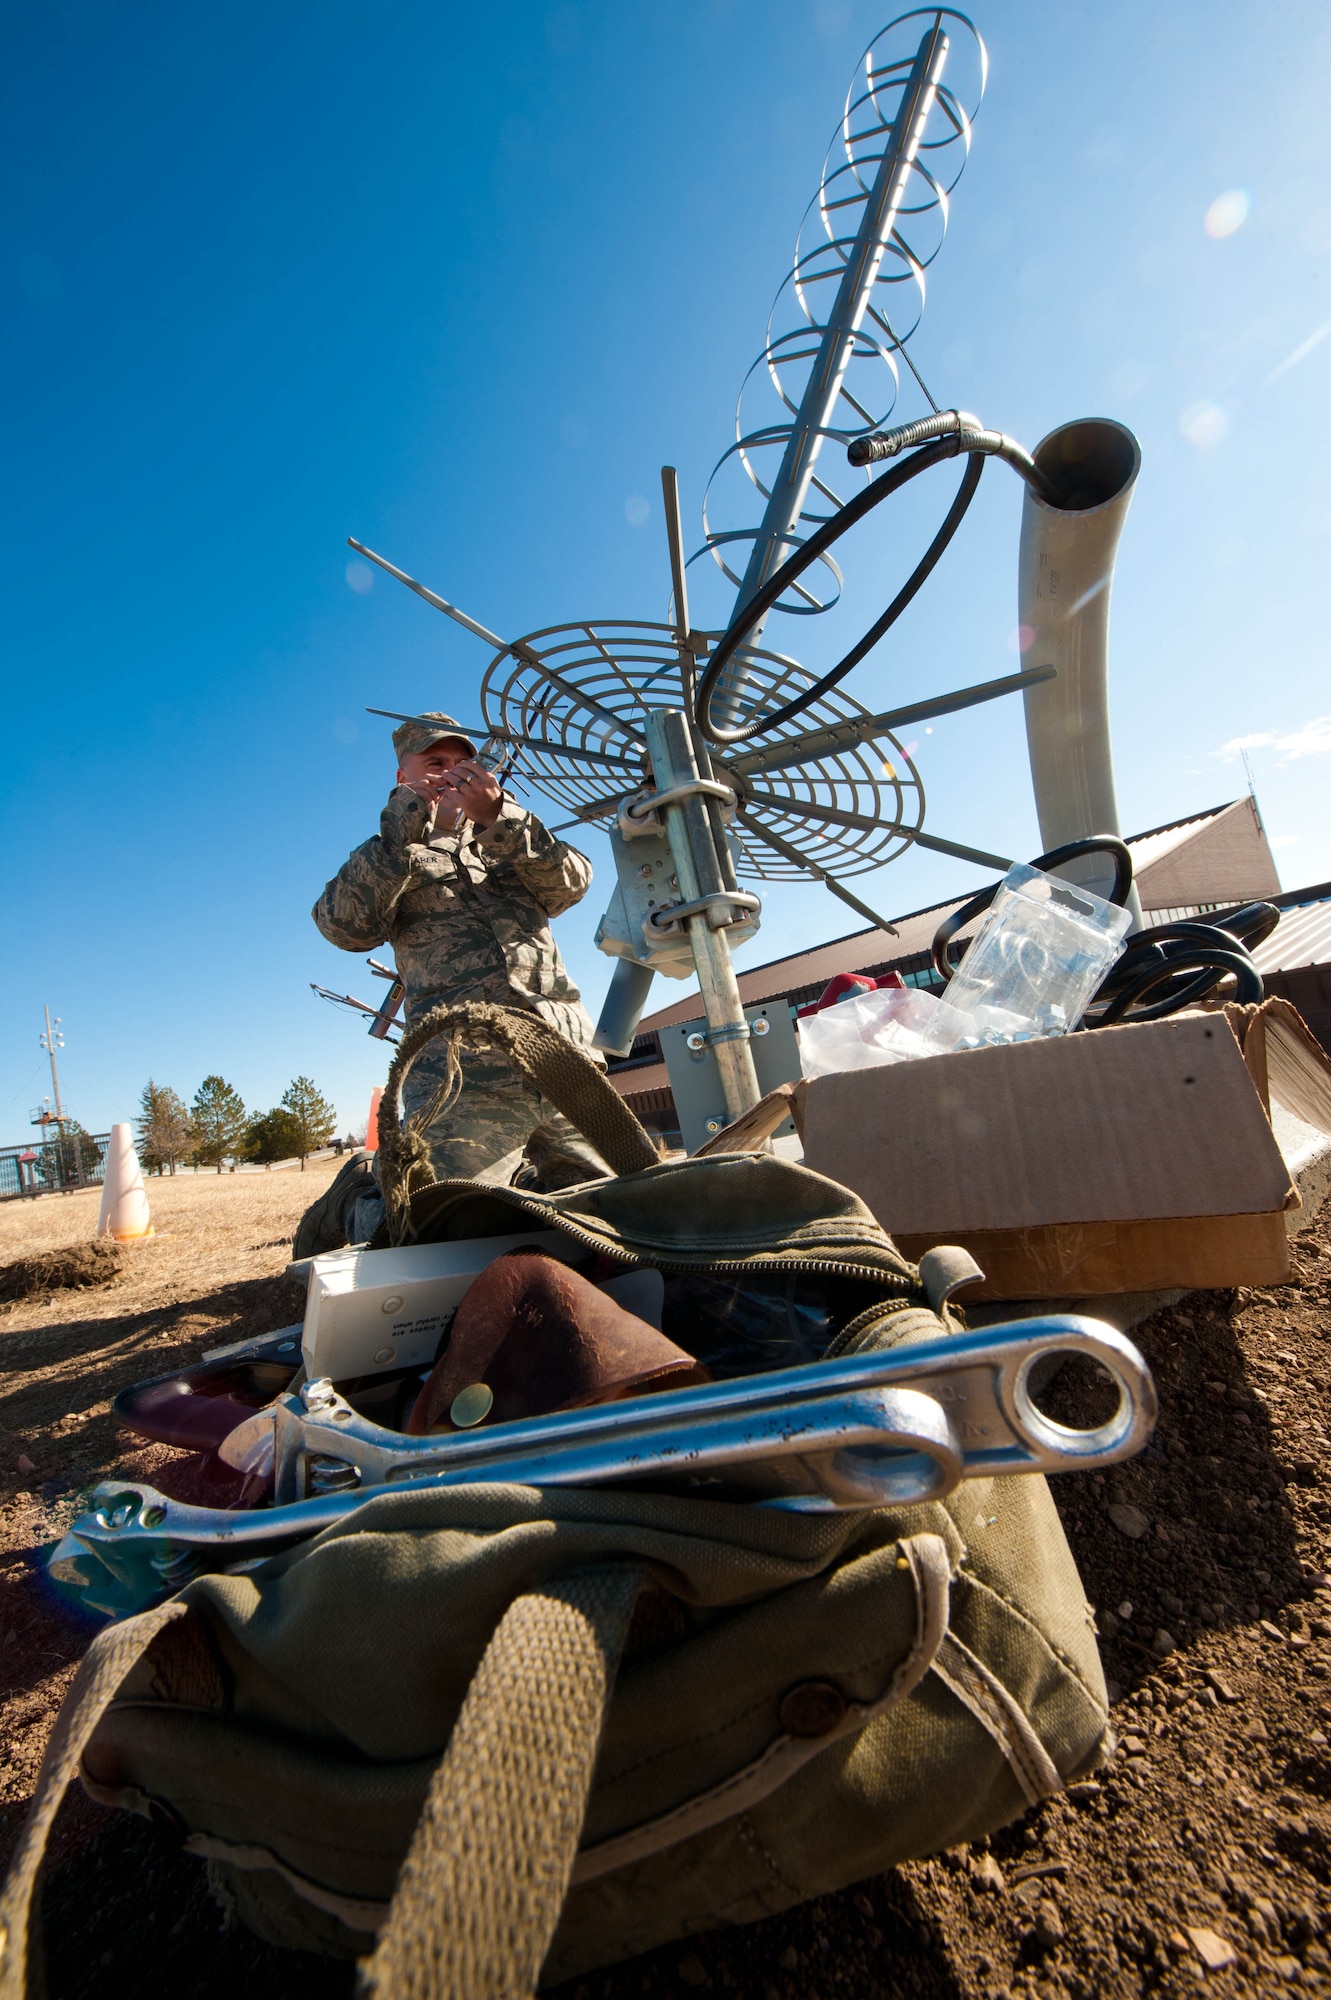 Master Sgt. James Shearer, 28th Communications Squadron transmission system radio maintainer, adjusts the reflector rim on a new antenna for the 28th Operations Support Squadron on Ellsworth Air Force Base, S.D., Feb. 13, 2012. The antenna reflector focuses beam signals into a single point to help direct the radiating signal back to the point of origin. (U.S. Air Force photo by Airman 1st Class Zachary Hada/Released)